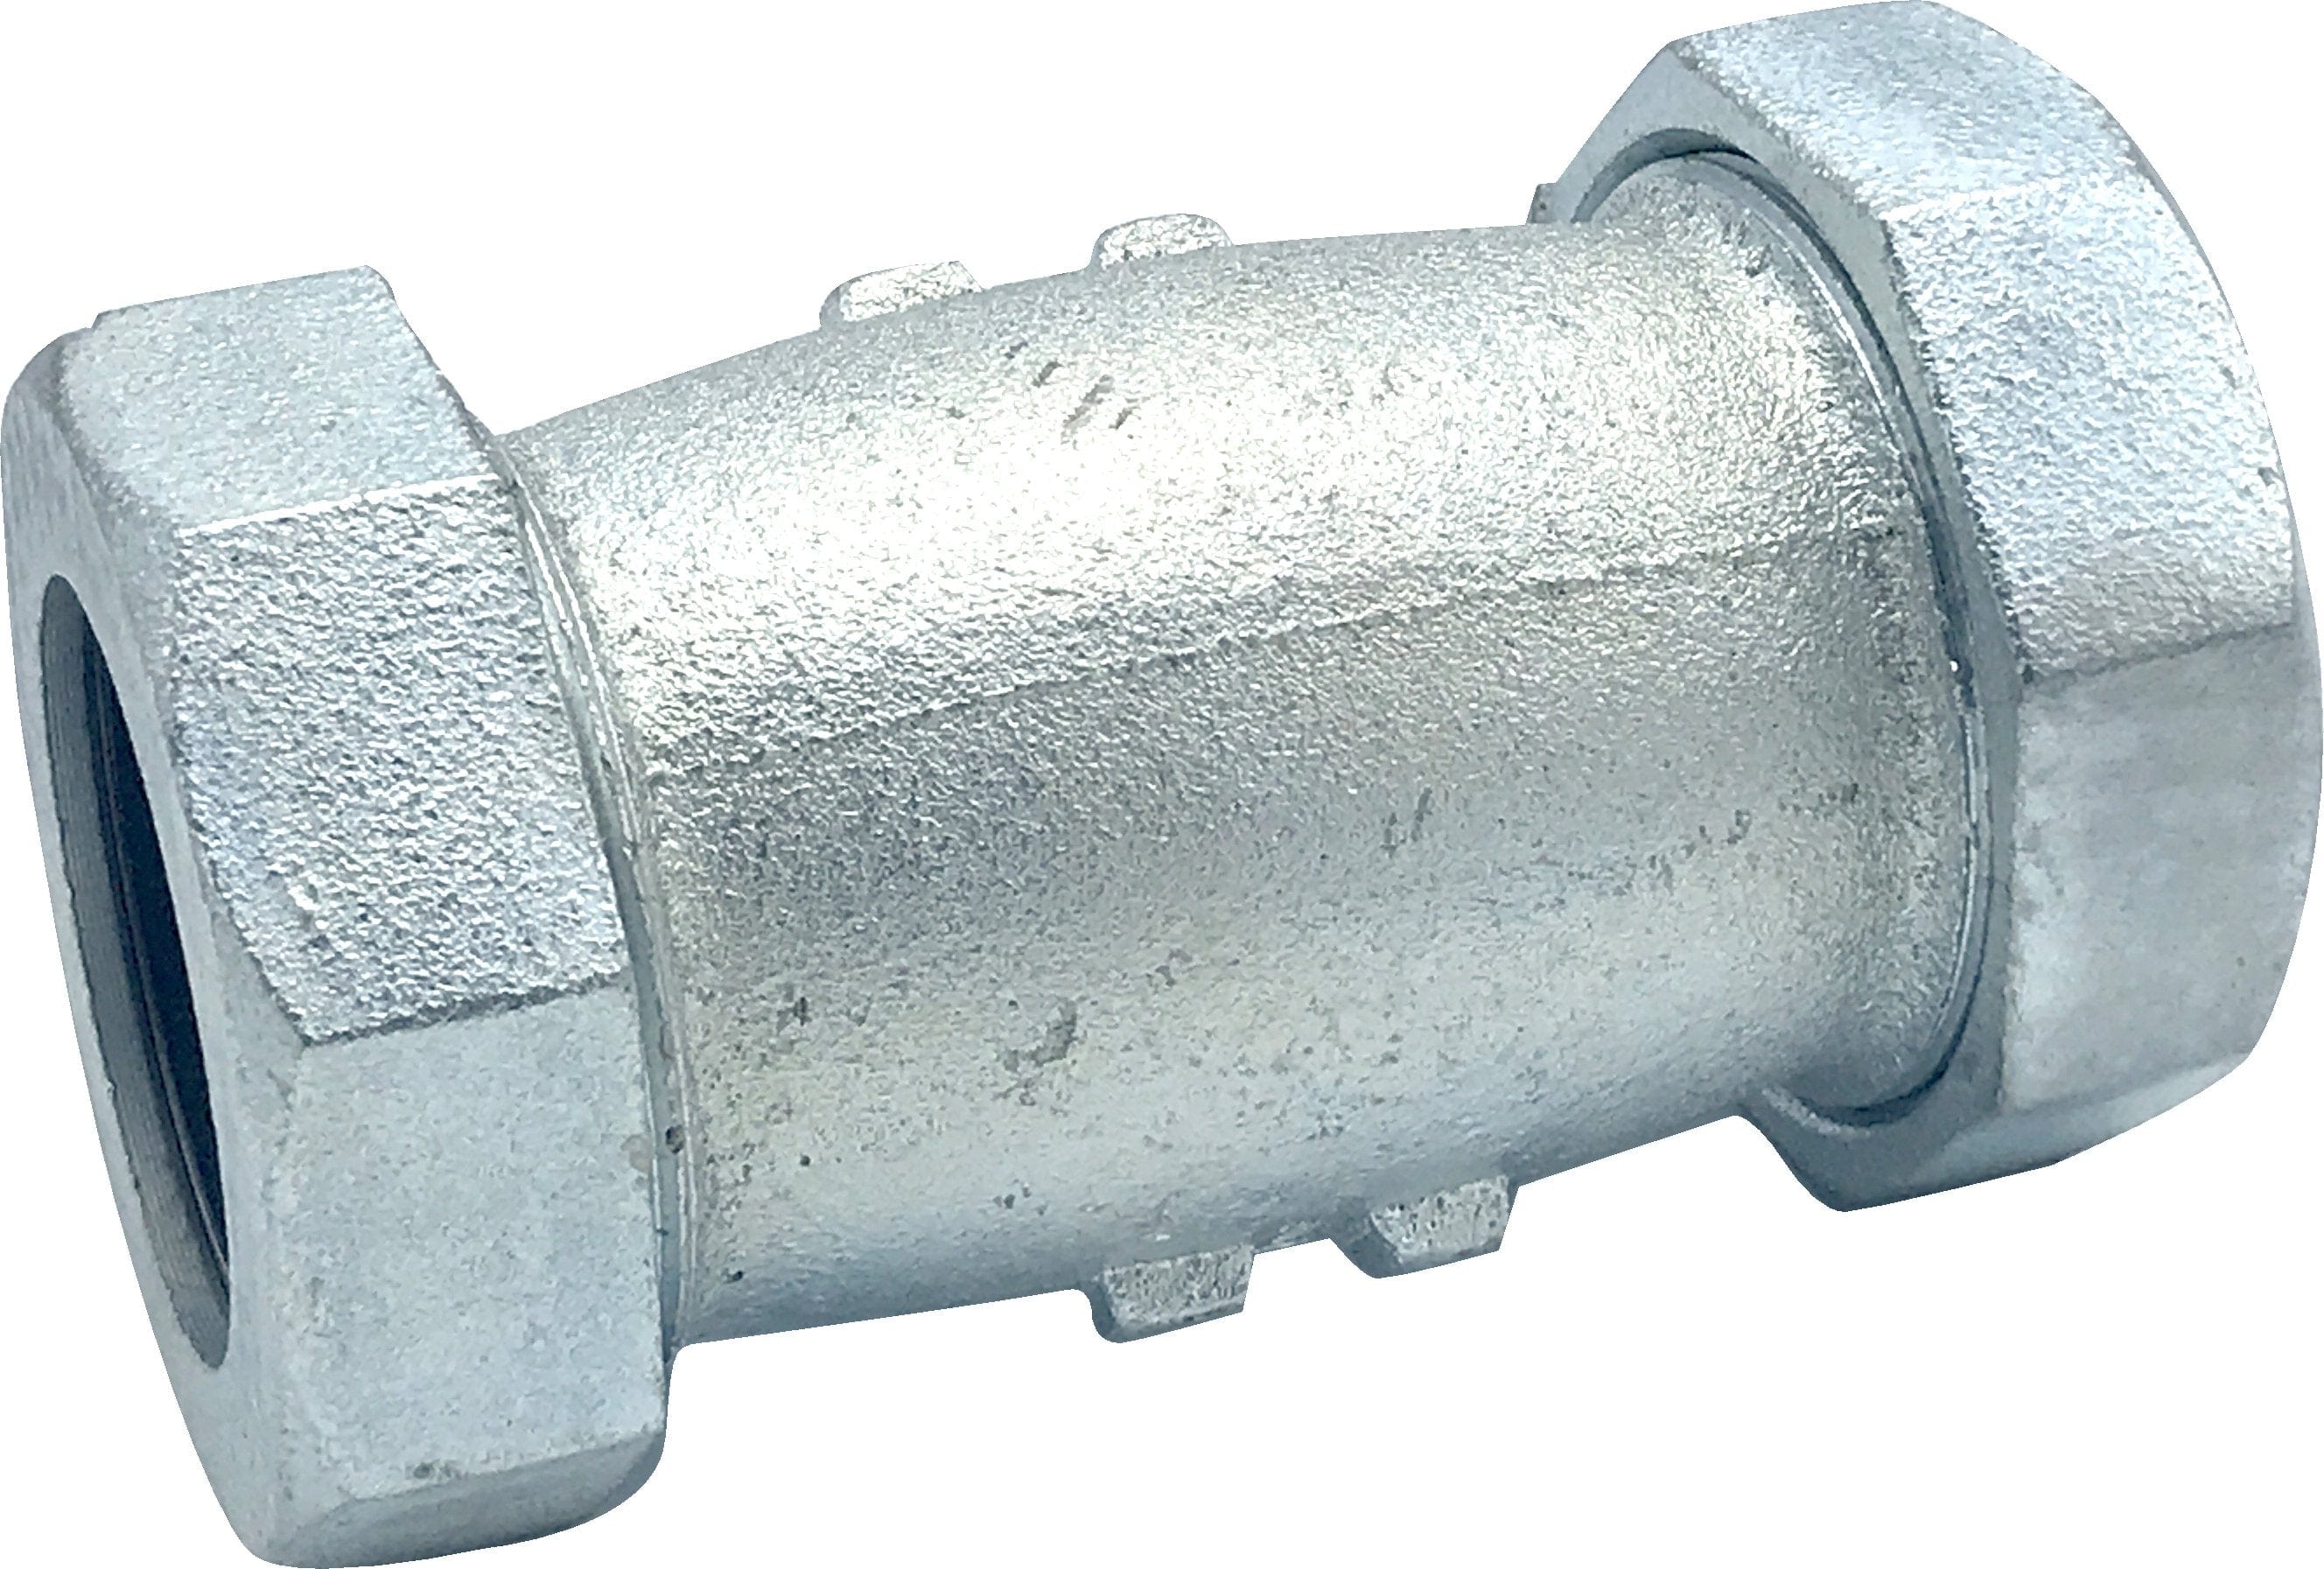 1" Long Galvanized Compression Coupling